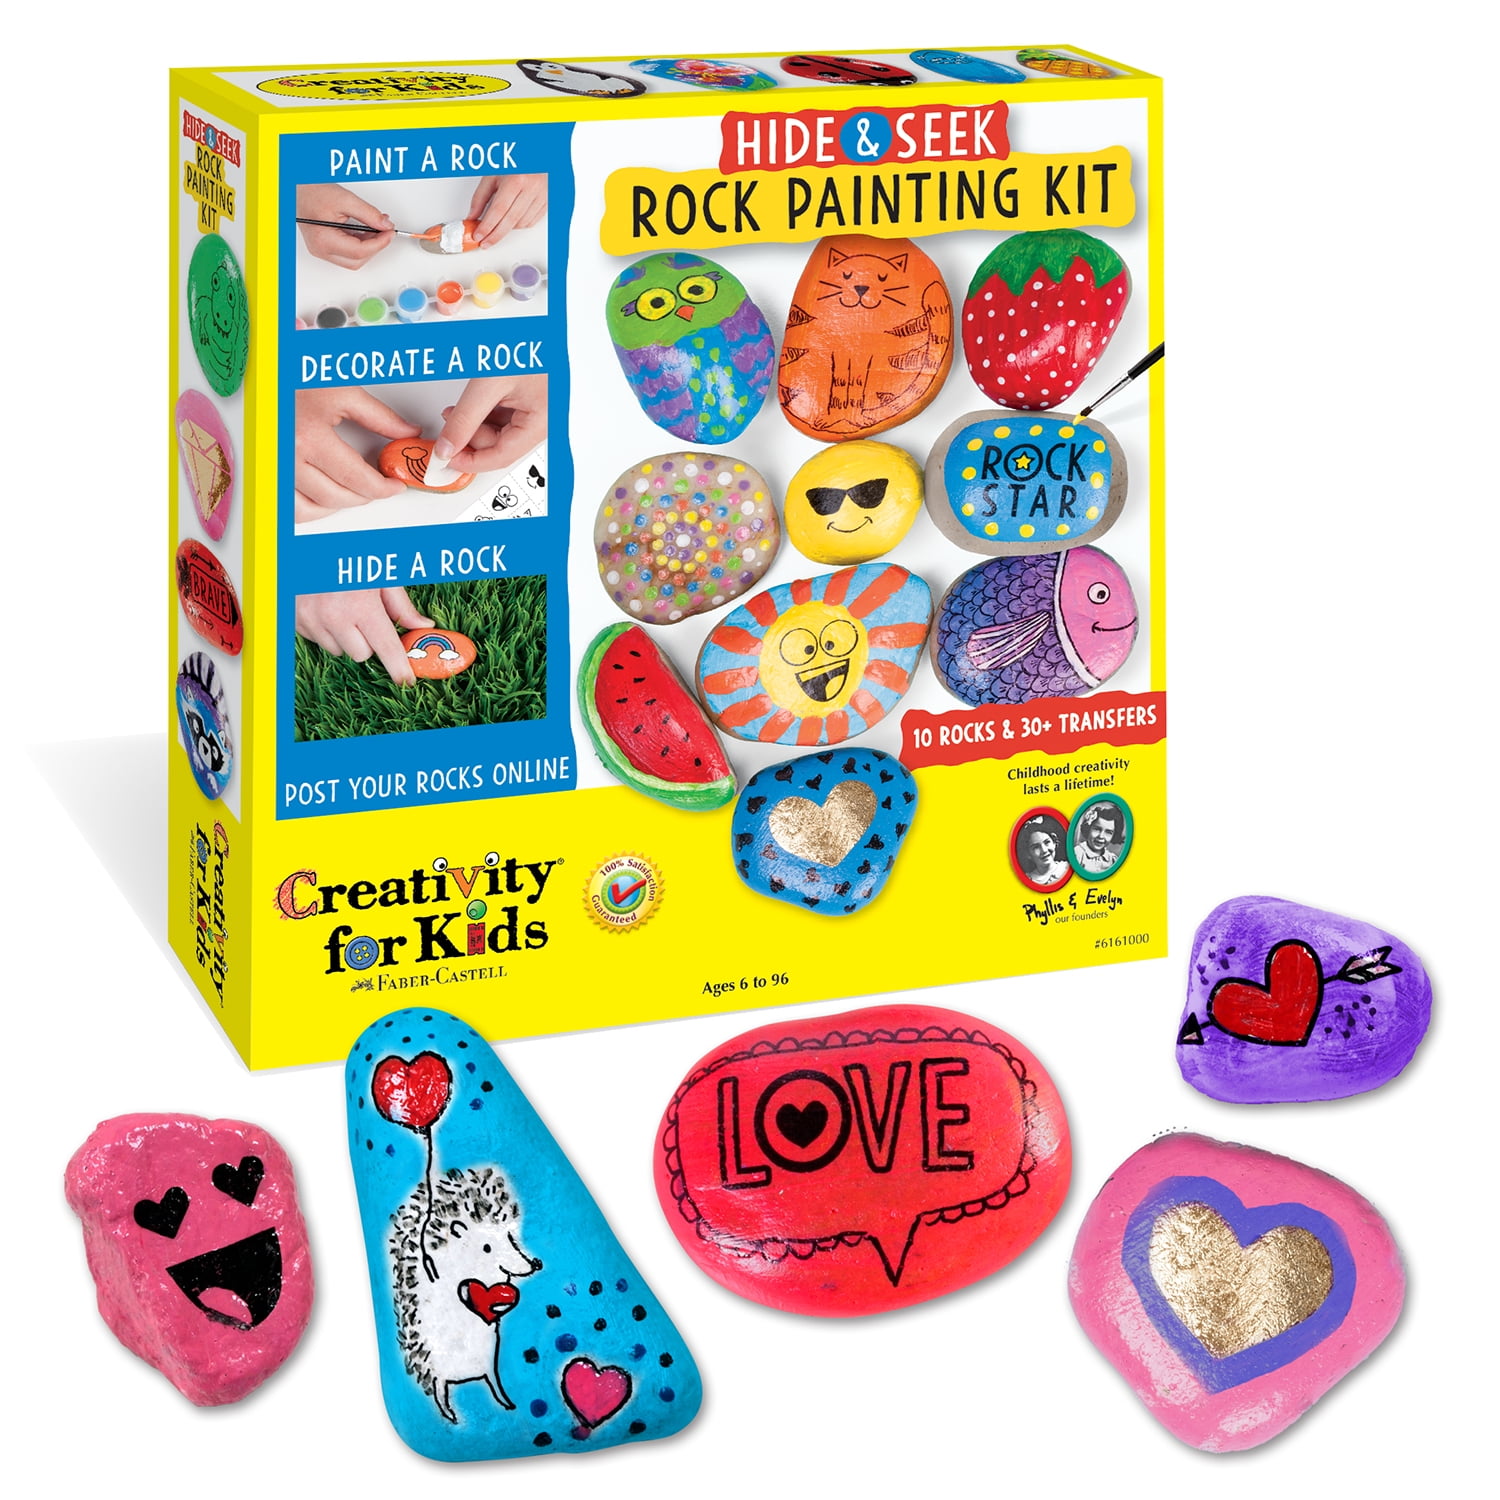 YIFUHH Creative Rock Painting Kit for Kids, Arts and Crafts for Boys&Girls Age 6-12Acrylic Paint, Waterproof Markers, gems-Kids Paintin